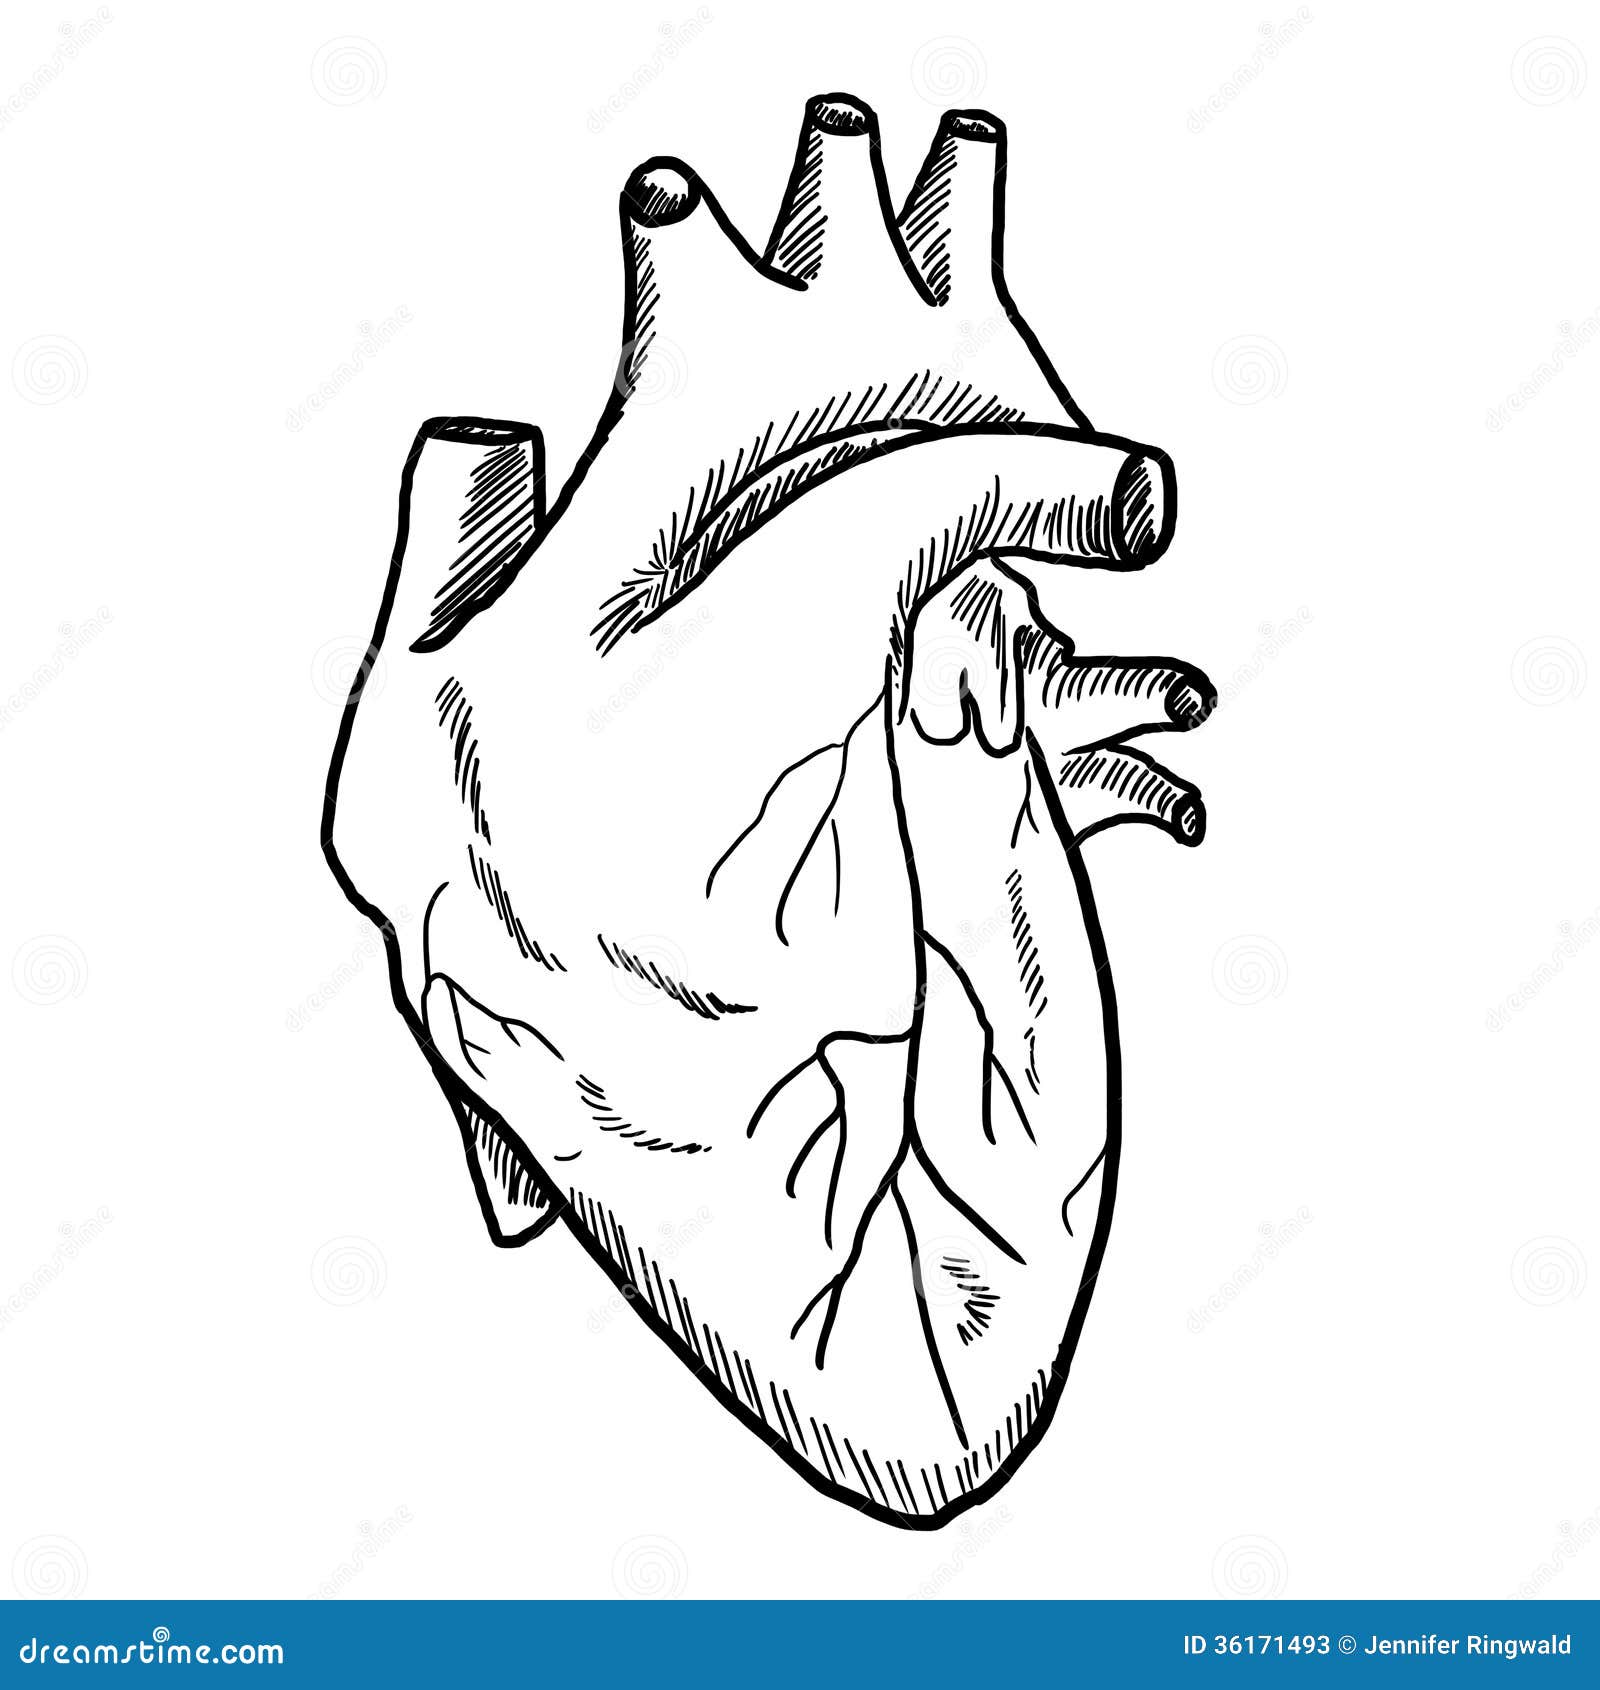 human heart clipart black and white - photo #3